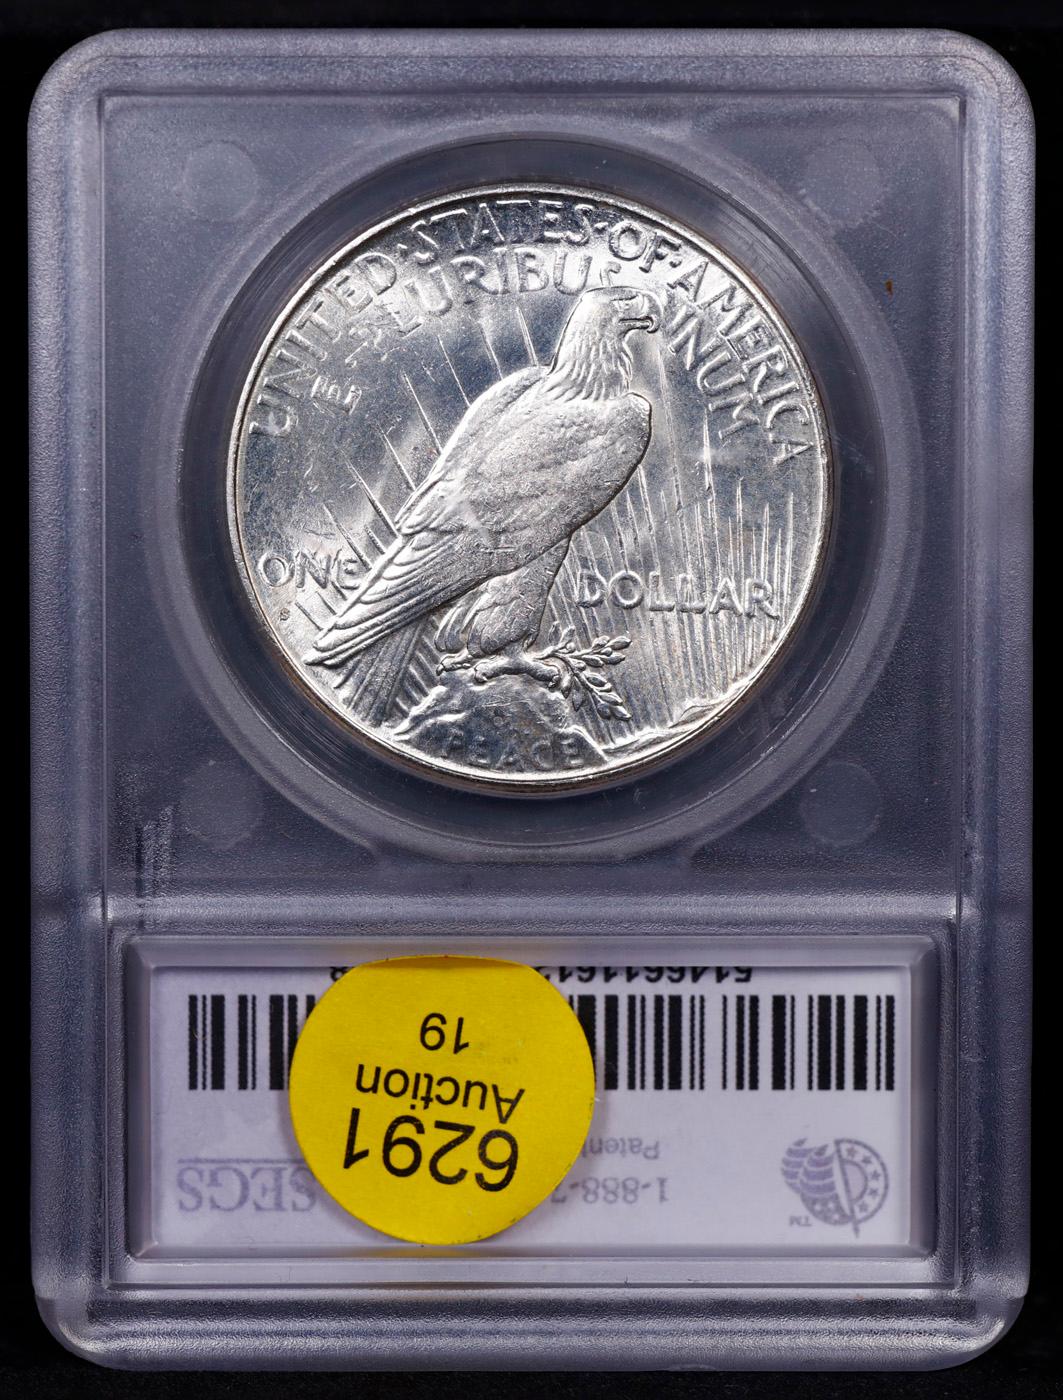 ***Auction Highlight*** 1925-s Peace Dollar $1 Graded ms63+ BY SEGS (fc)